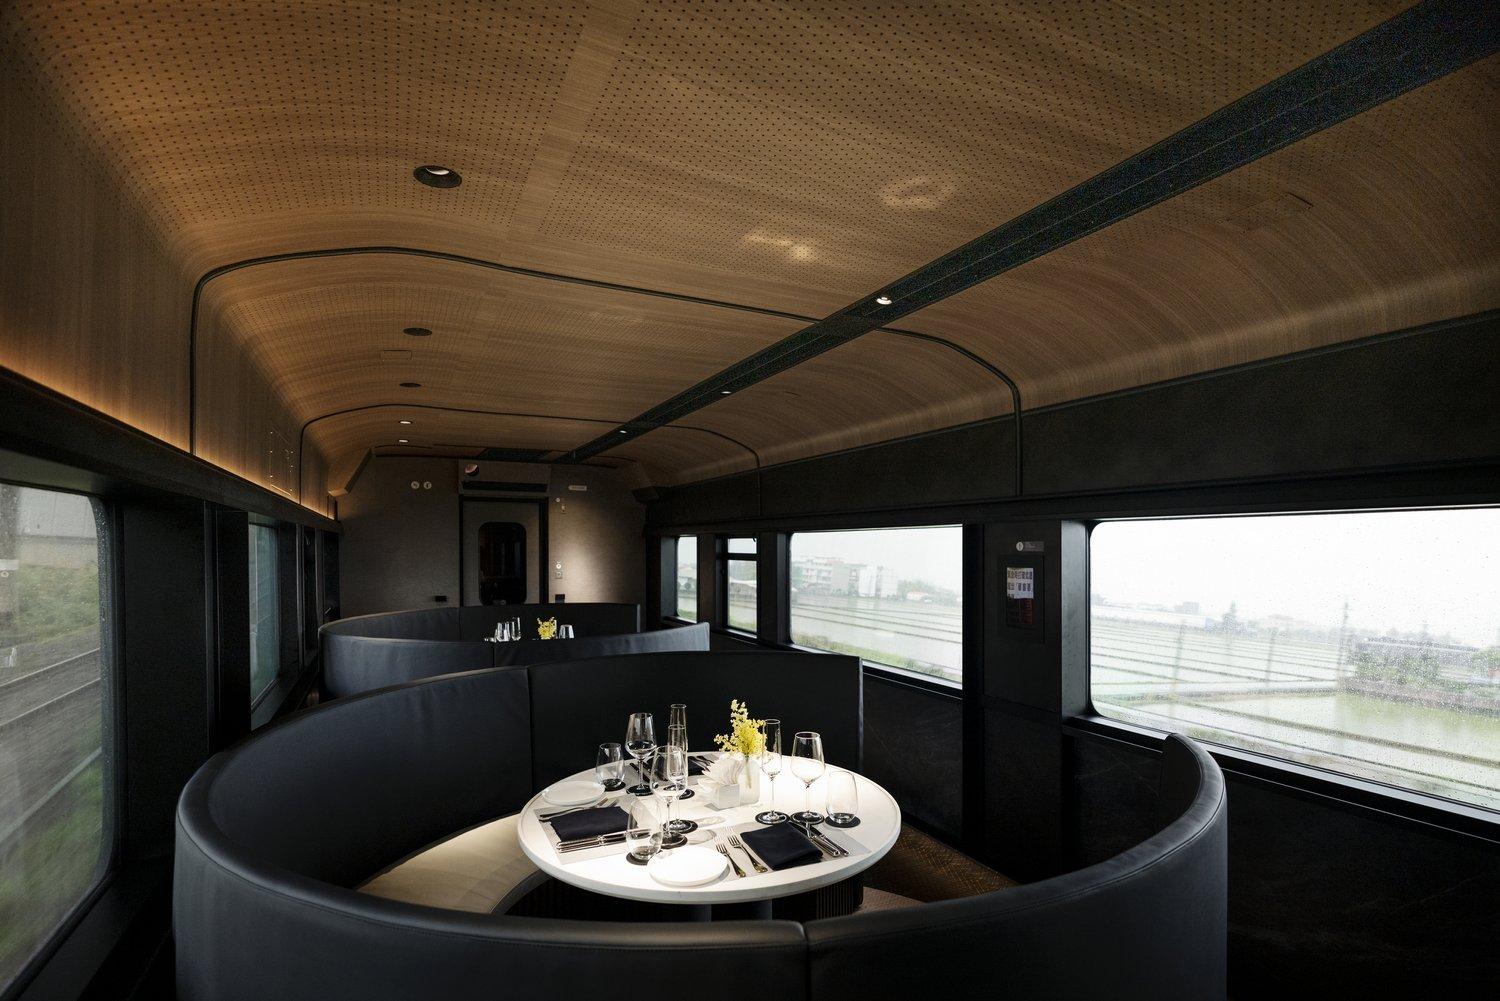 This scenic train in Taiwan is also a restaurant on wheels